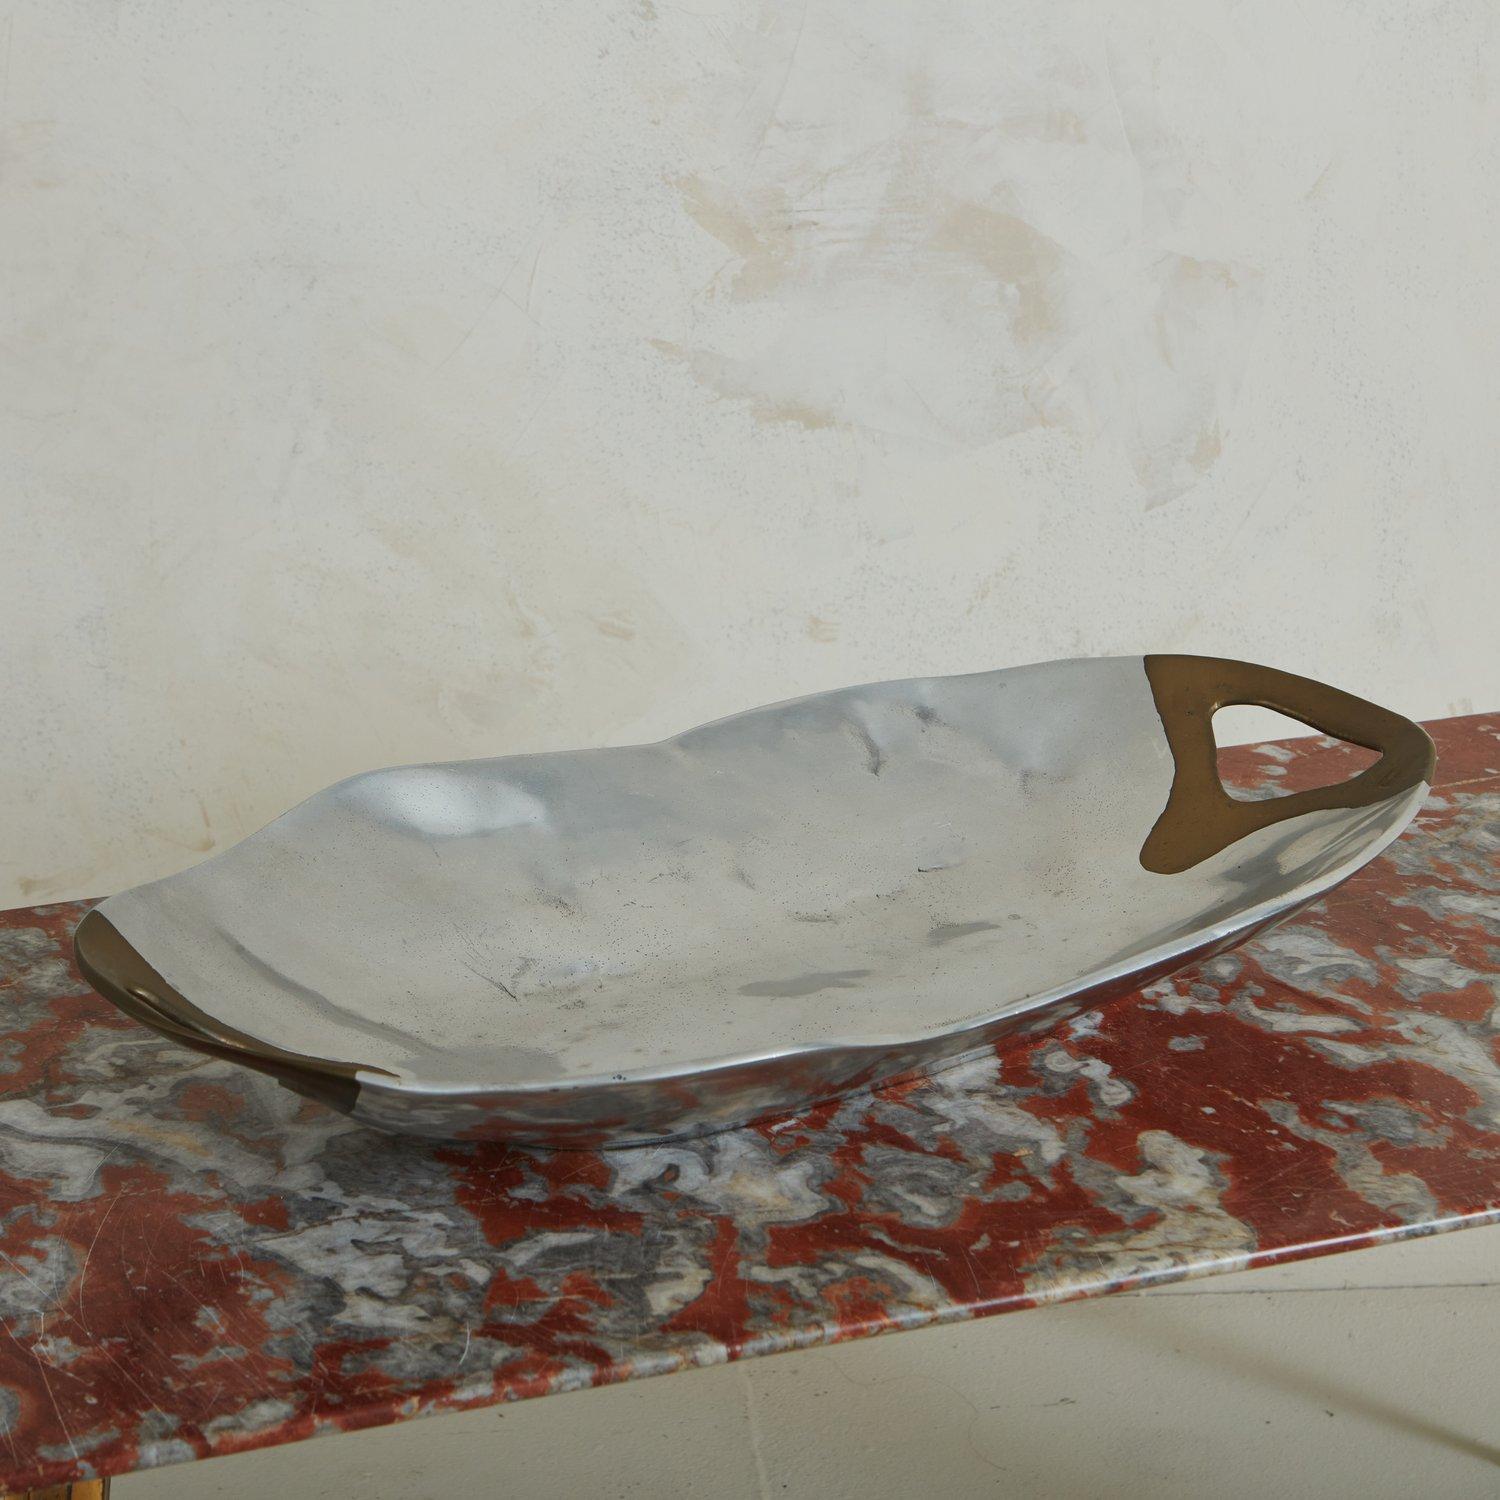 A handsome 1980s aluminum + brass oval tray by David Marshall. Marked ‘David Marshall Diseños S.A. Made in Spain” on base. Sourced in Spain, 1980s.

A similar tray by David Marshall is available.